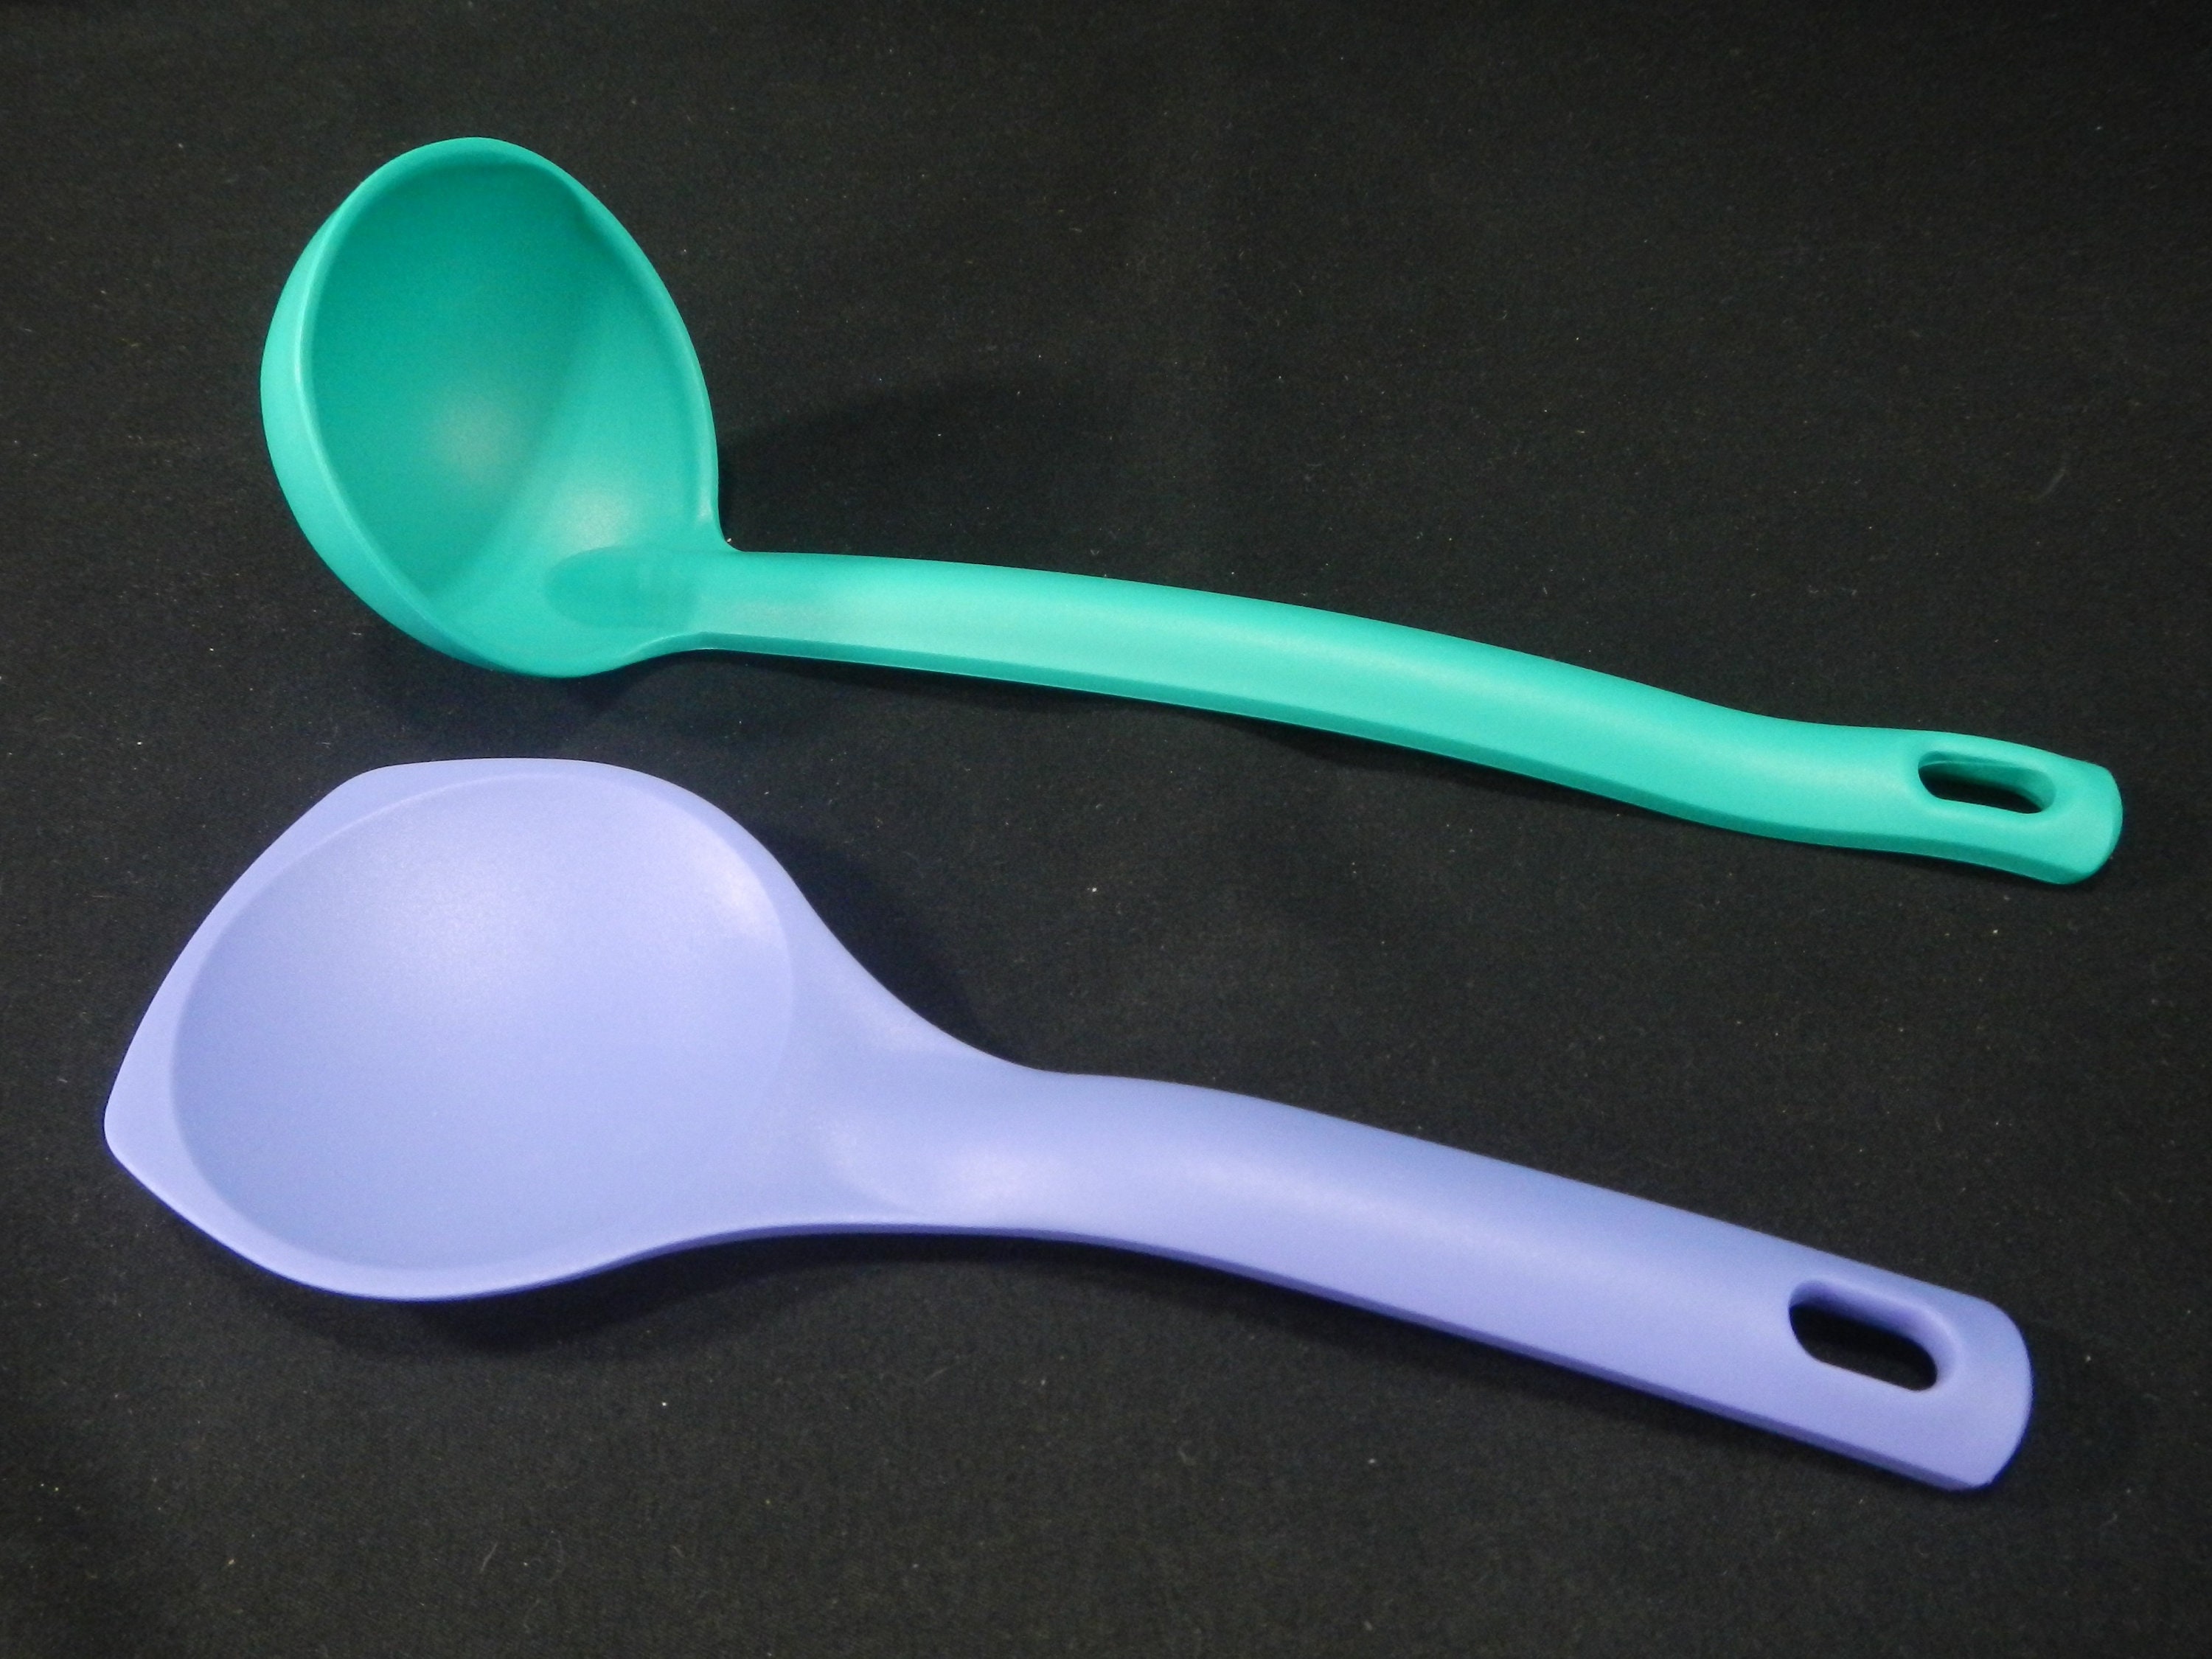 Vintage Tupperware Legacy Ladle OR Spoon CHOICE Green, Blue, 3189, 1990s  Rice Spoon, Cottage Decor, Retro Kitchen, Serving Utensil 